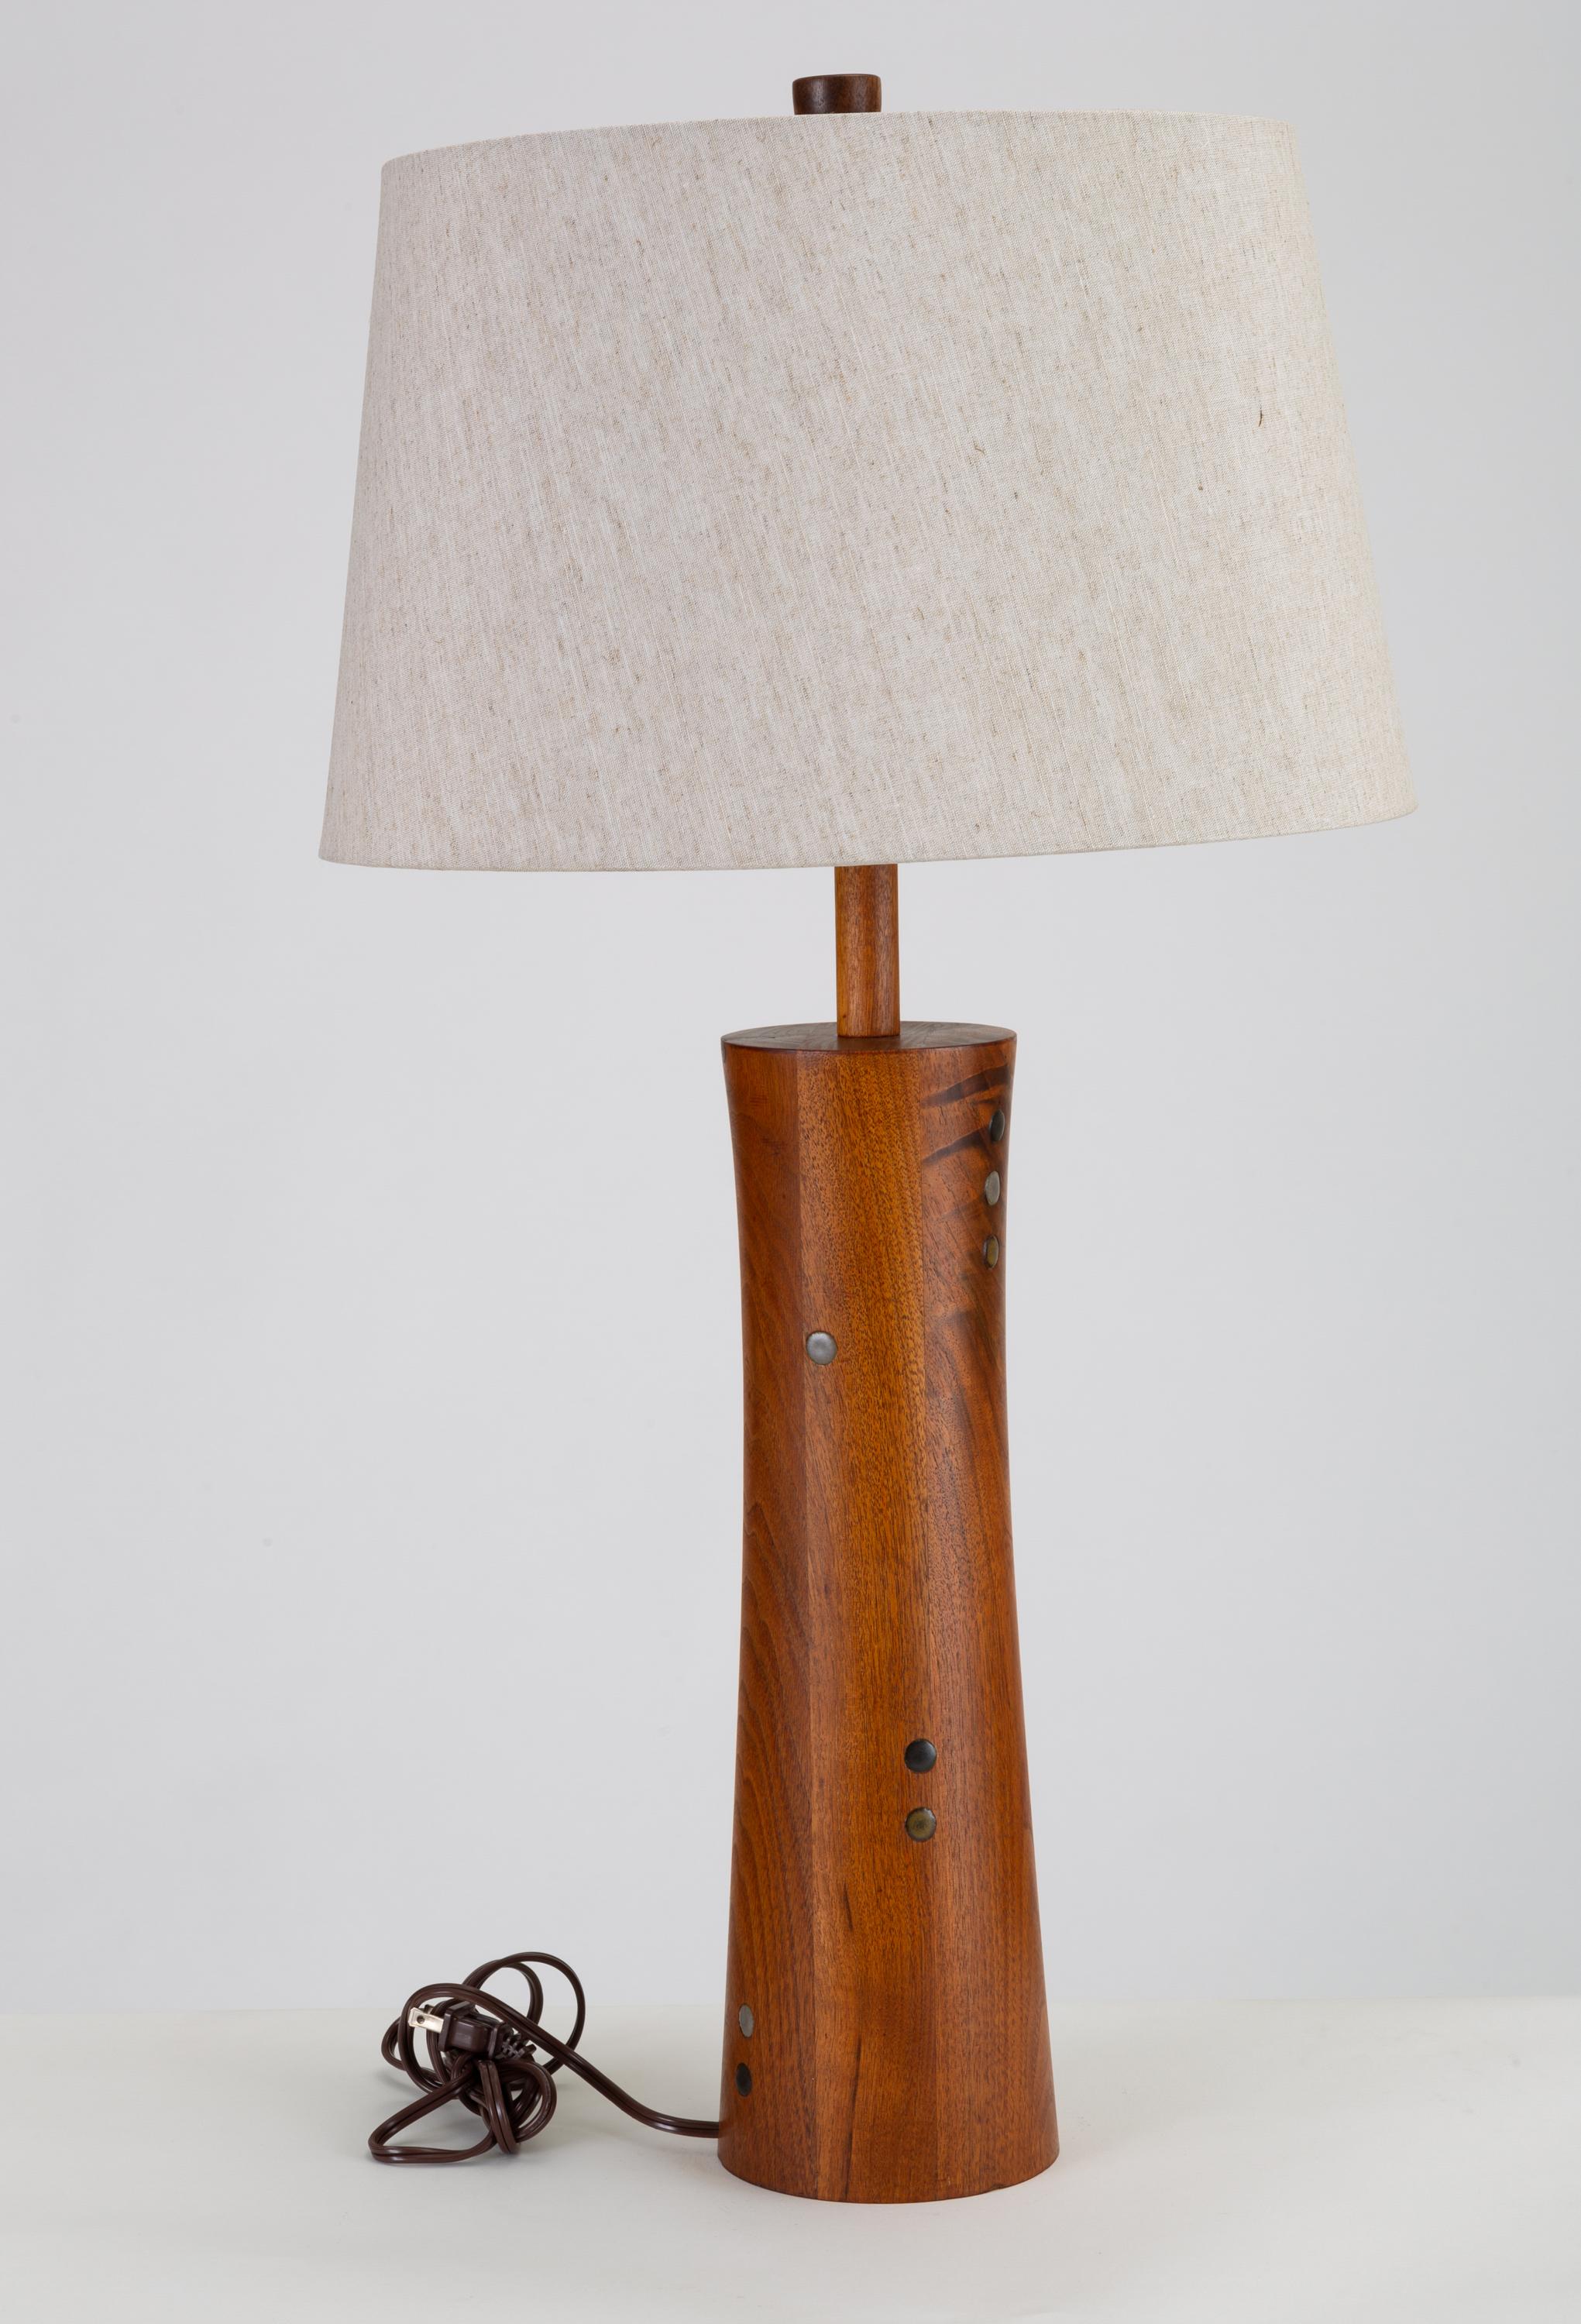 American Wooden Table Lamp with Tile Inlay by Gordon & Jane Martz